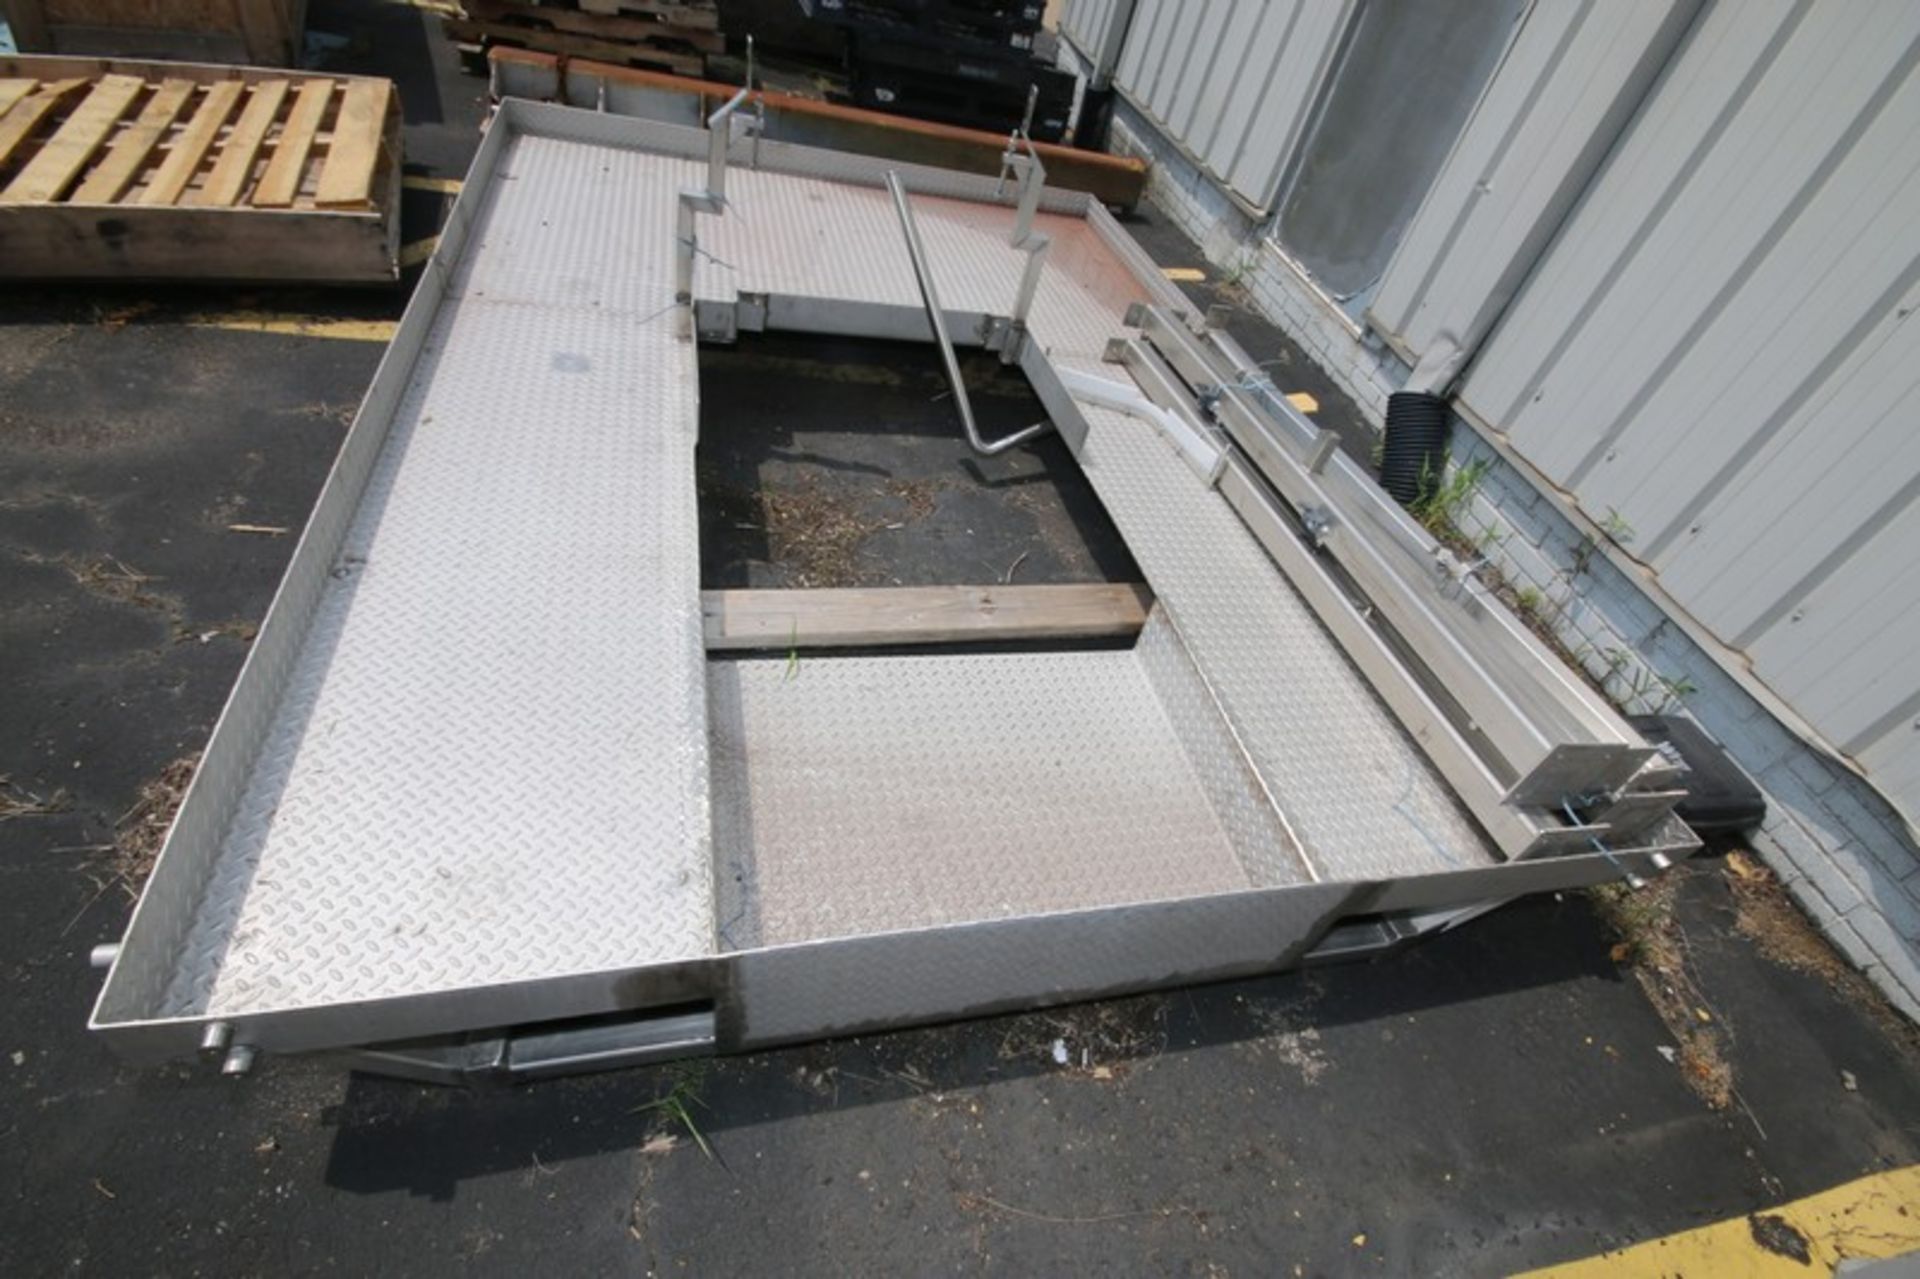 127" L x 88" W S/S VFFS / Scale Platform with Diamond Plate Deck with Some Supports (INV#96684) ( - Bild 2 aus 4